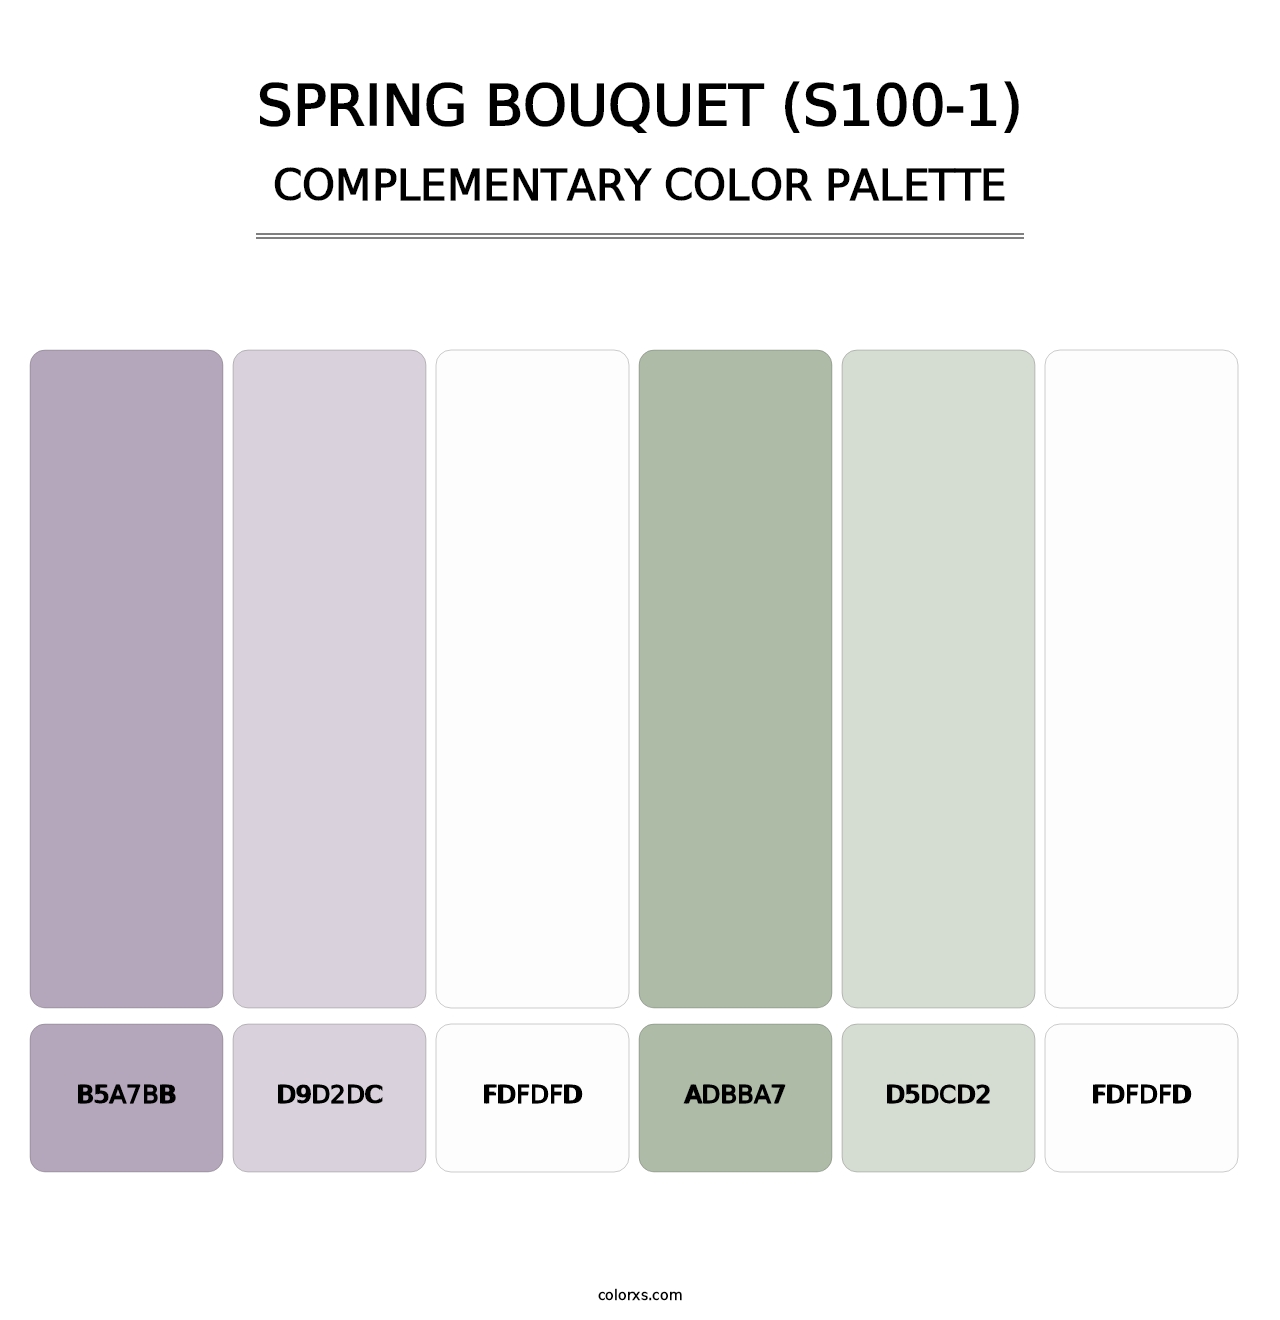 Spring Bouquet (S100-1) - Complementary Color Palette